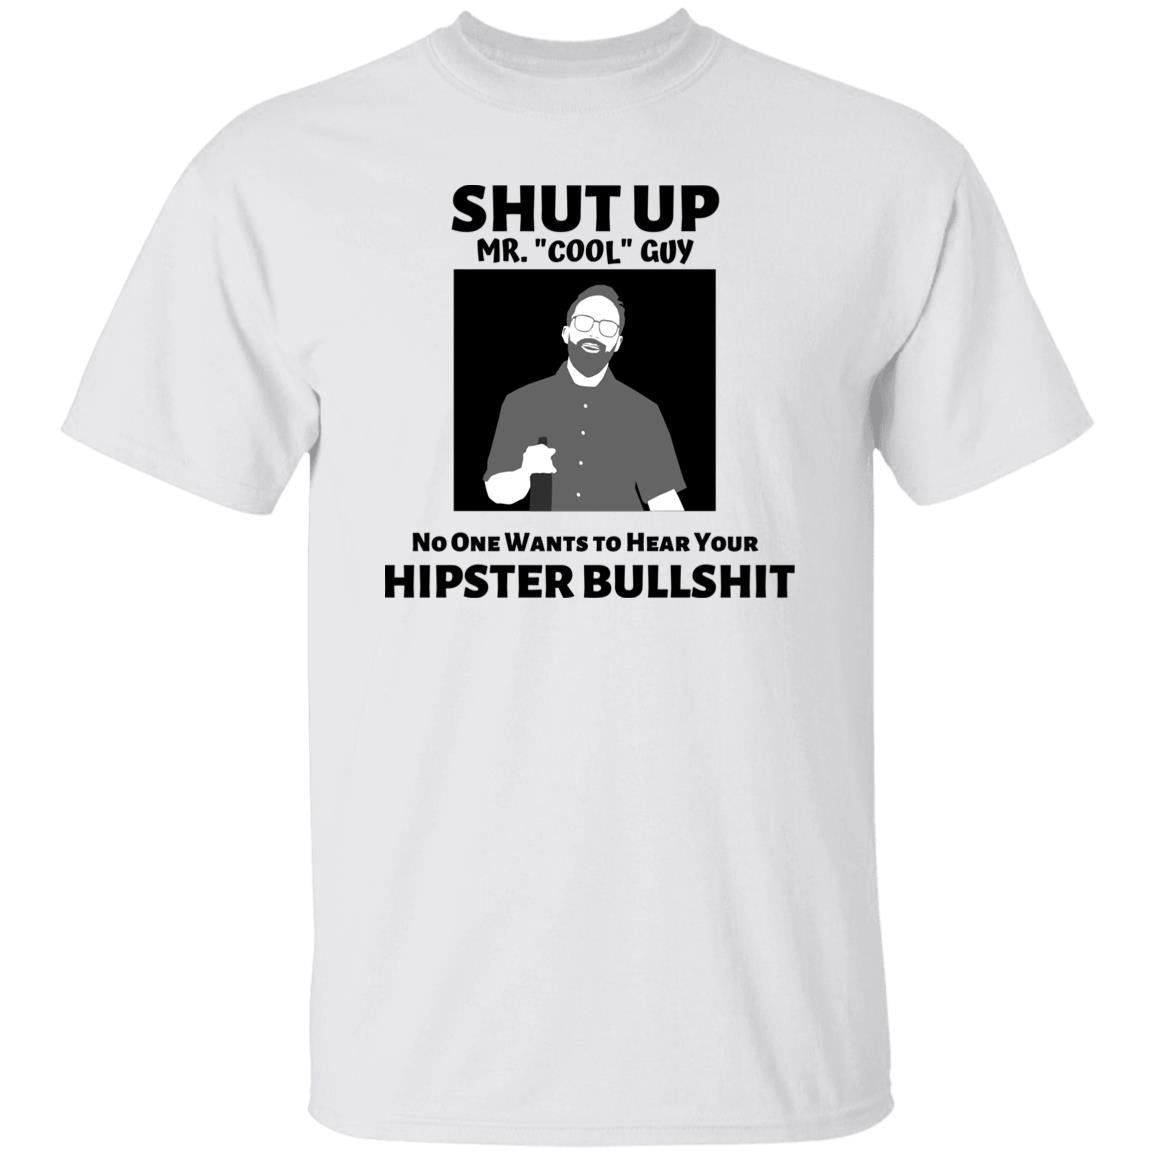 Funny Anti-Hipster T-Shirt, Sarcastic Mr. Cool Guy shirt, Funny Hipster shirt, Funny Offensive shirt